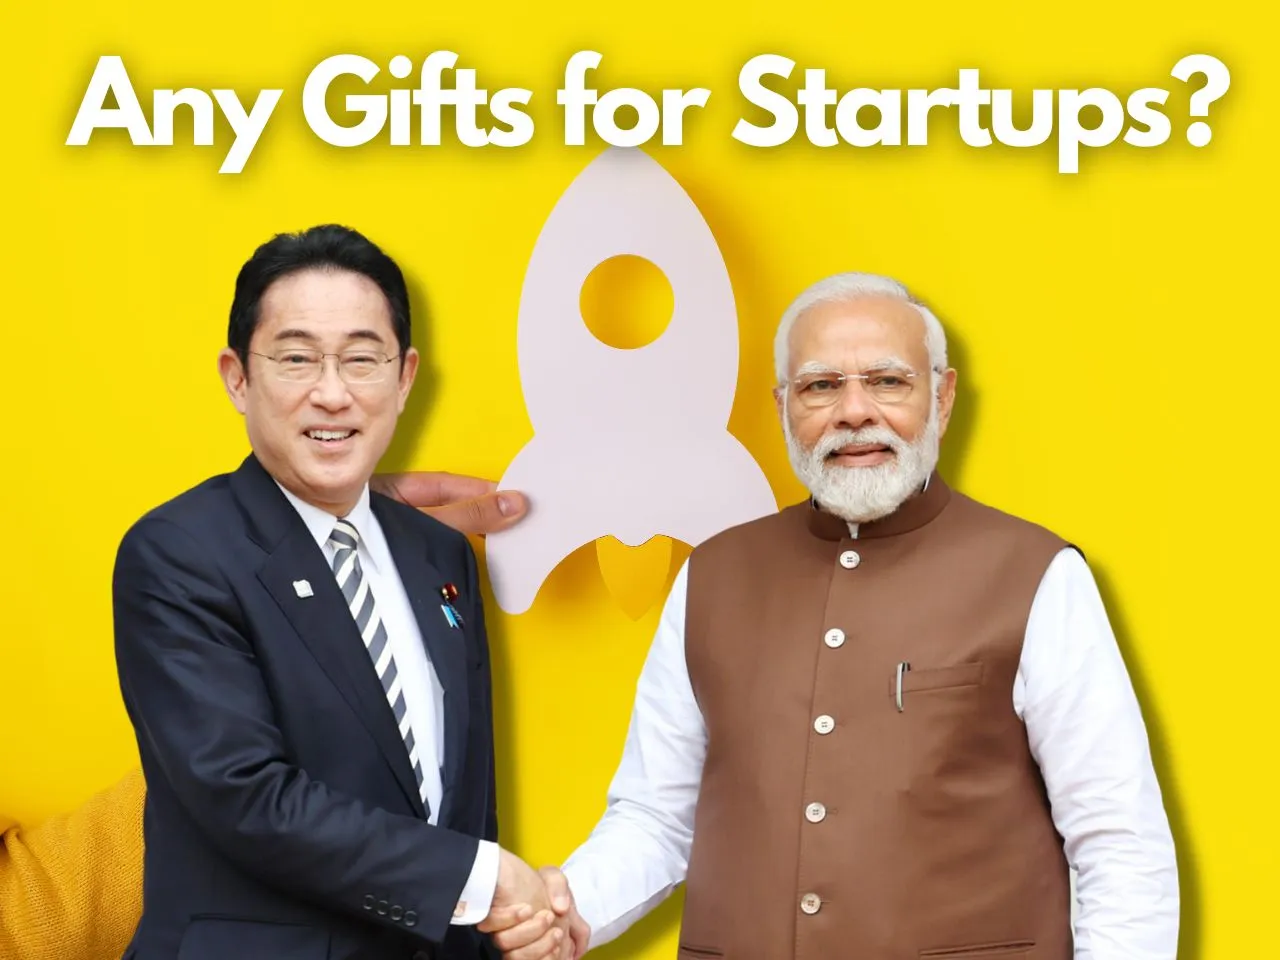 Gifts for startups